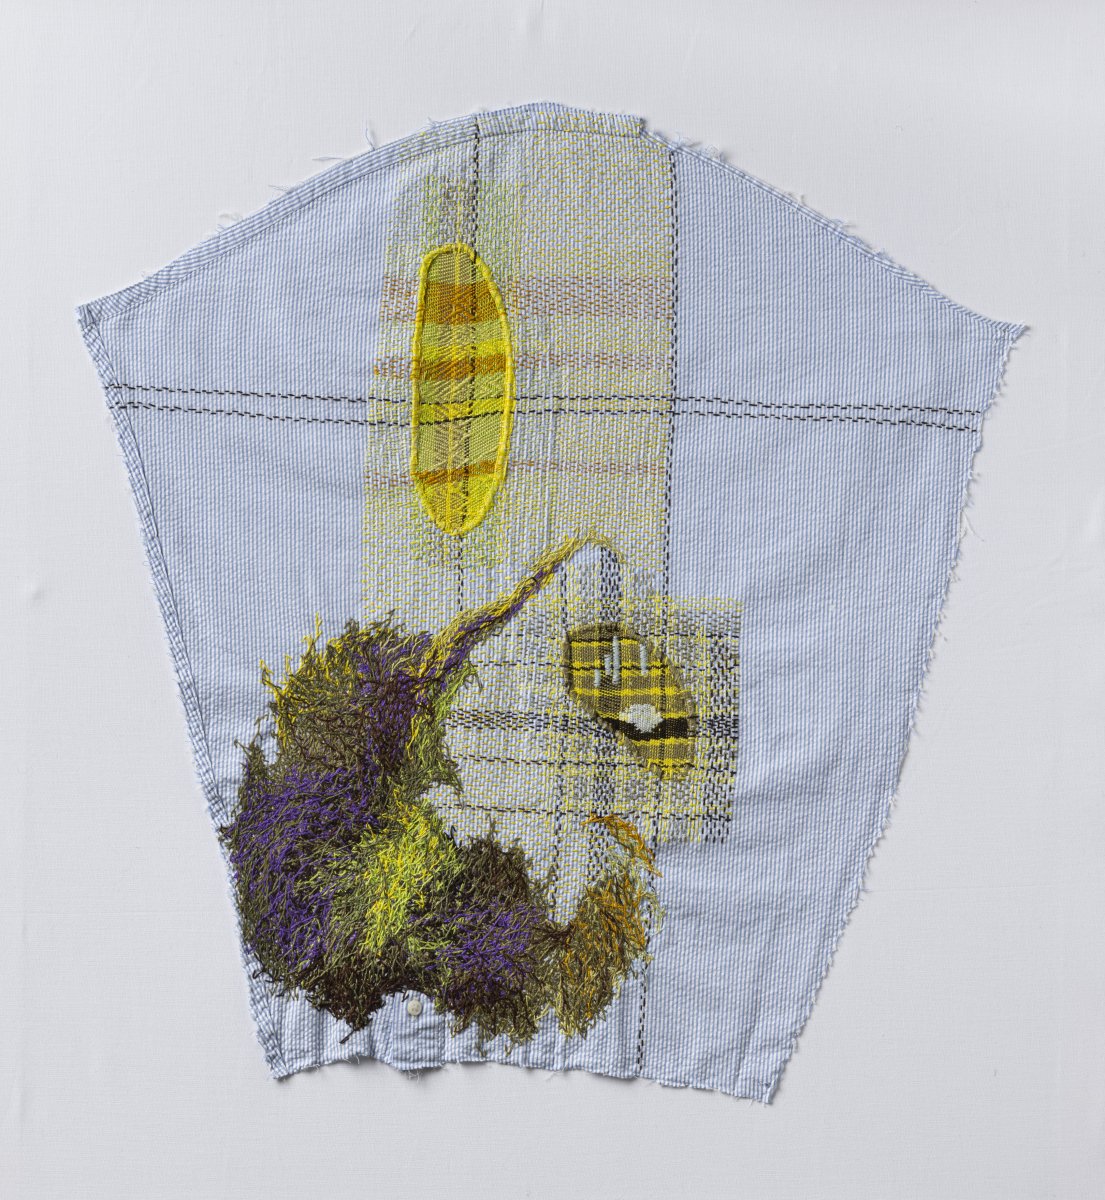 Sleeve 5. 2021. Cotton mending and embroidery in cotton and polyester. Photography: Tim Thayer.